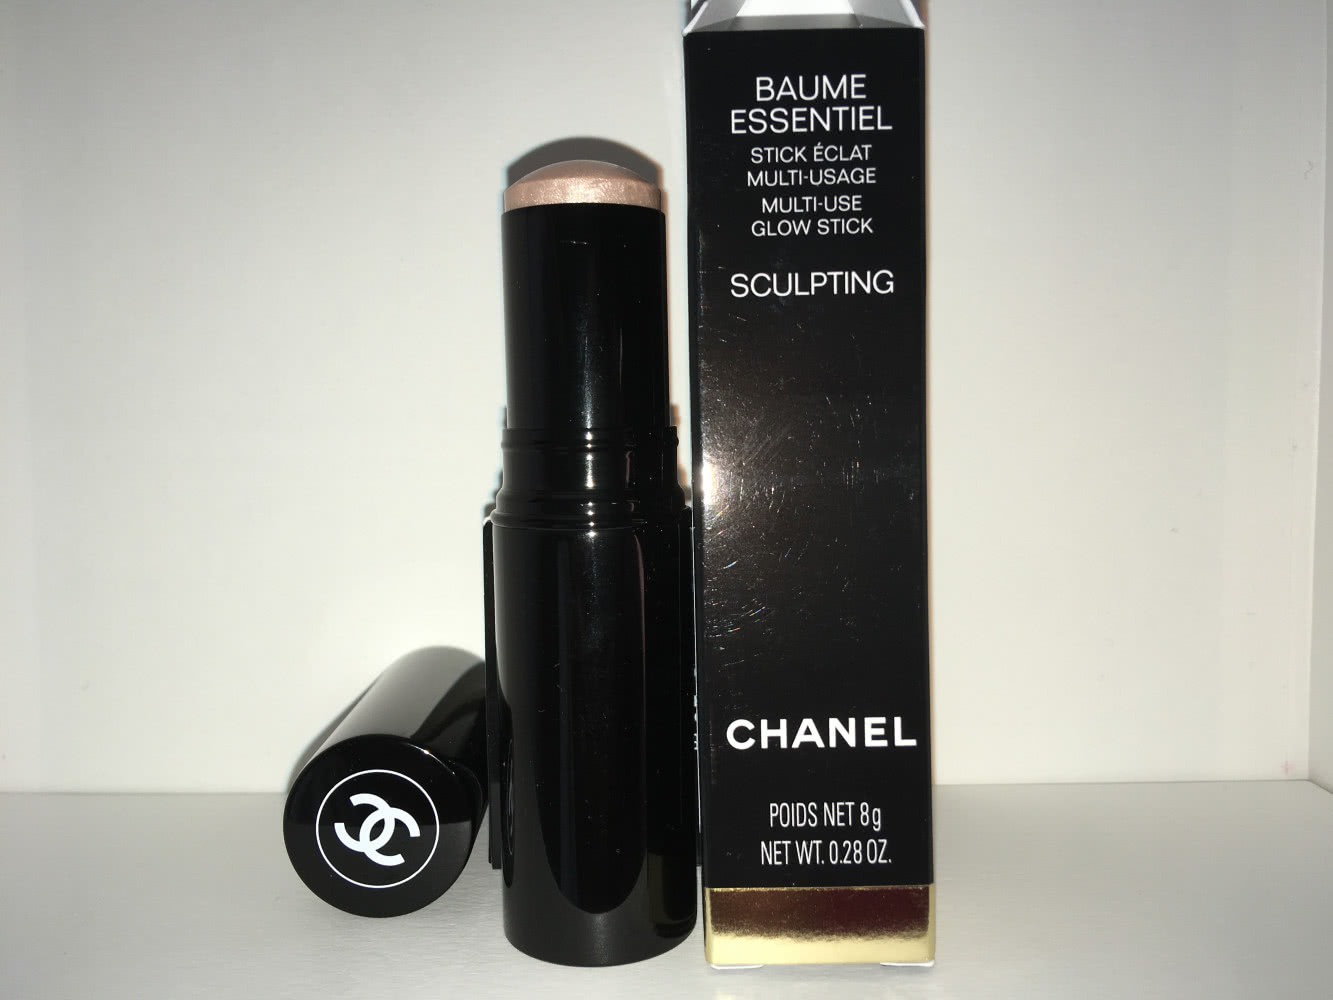 Chanel Baume Essentiel Multi-Use Glow Stick Is My Highlighter — Review